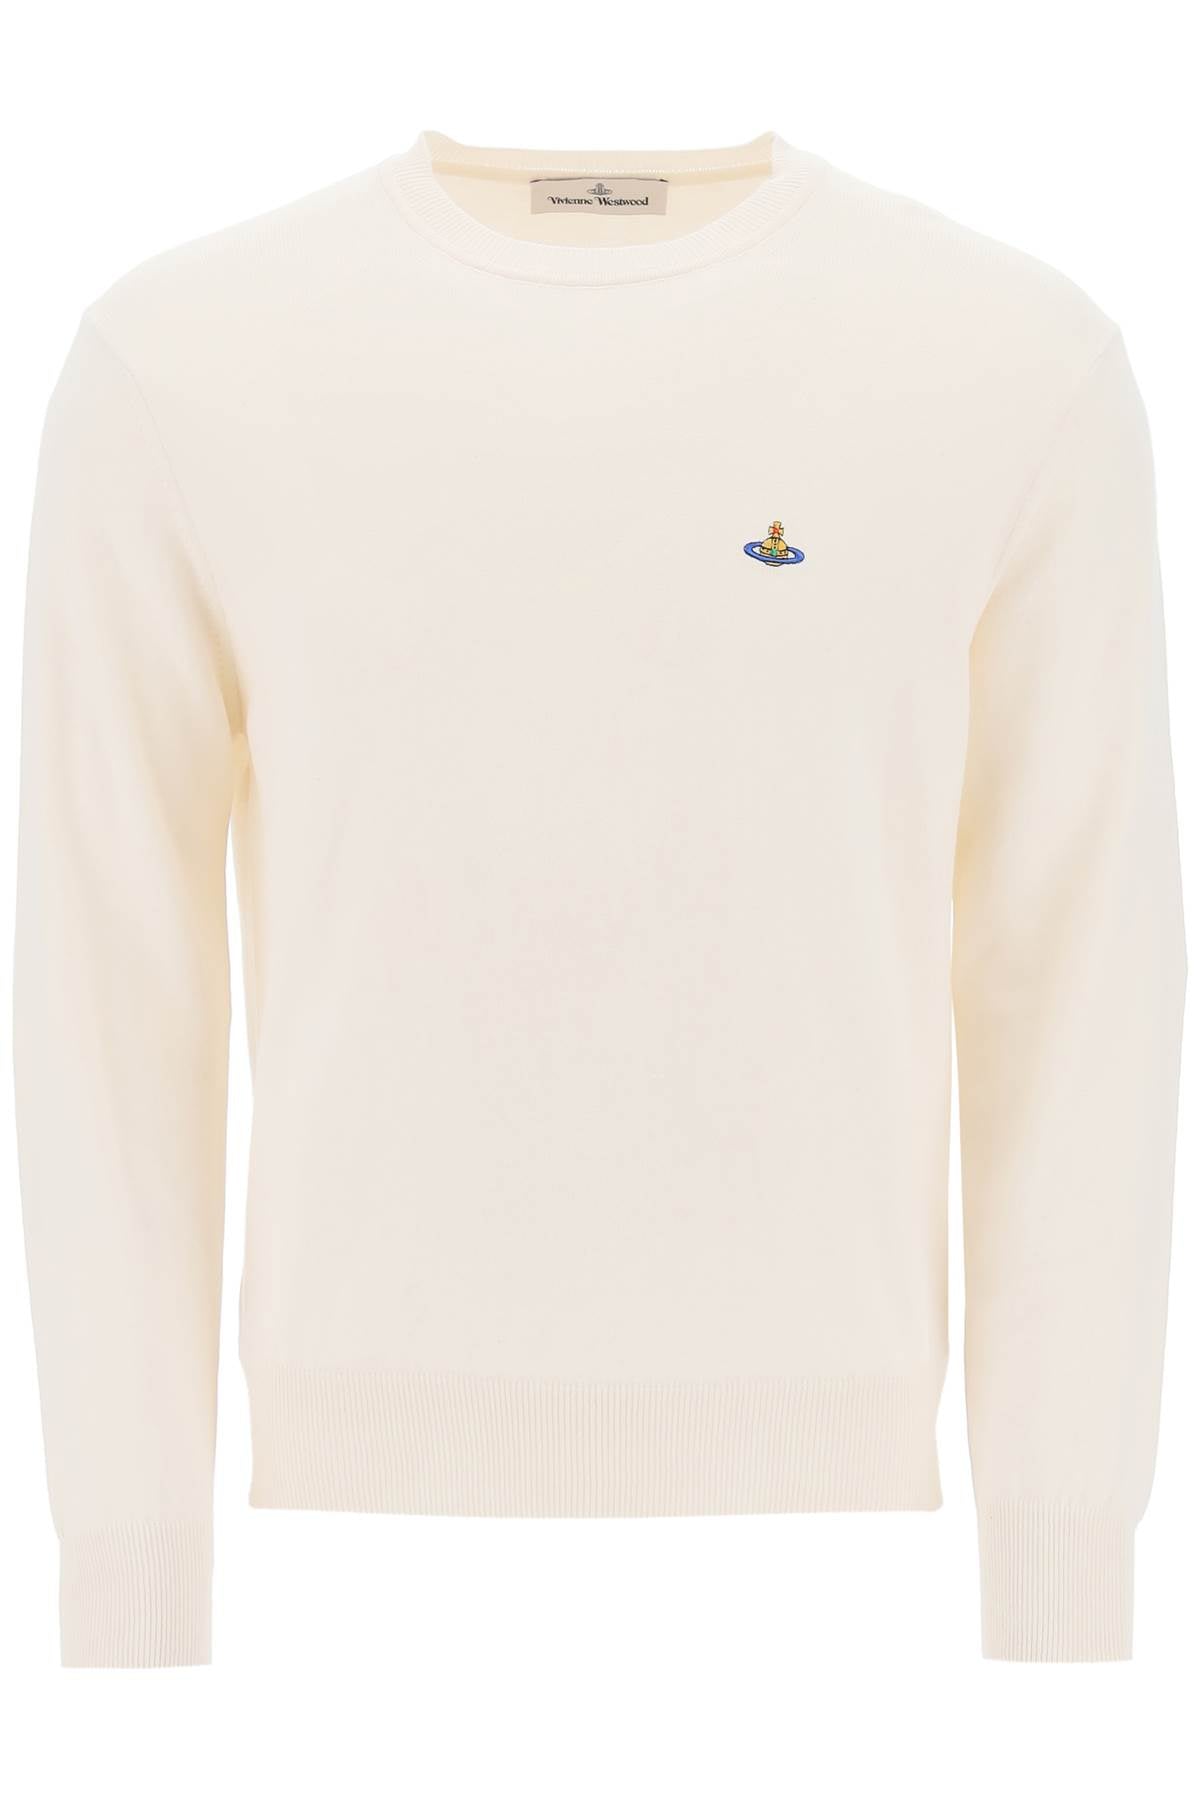 Vivienne westwood organic cotton and cashmere sweater